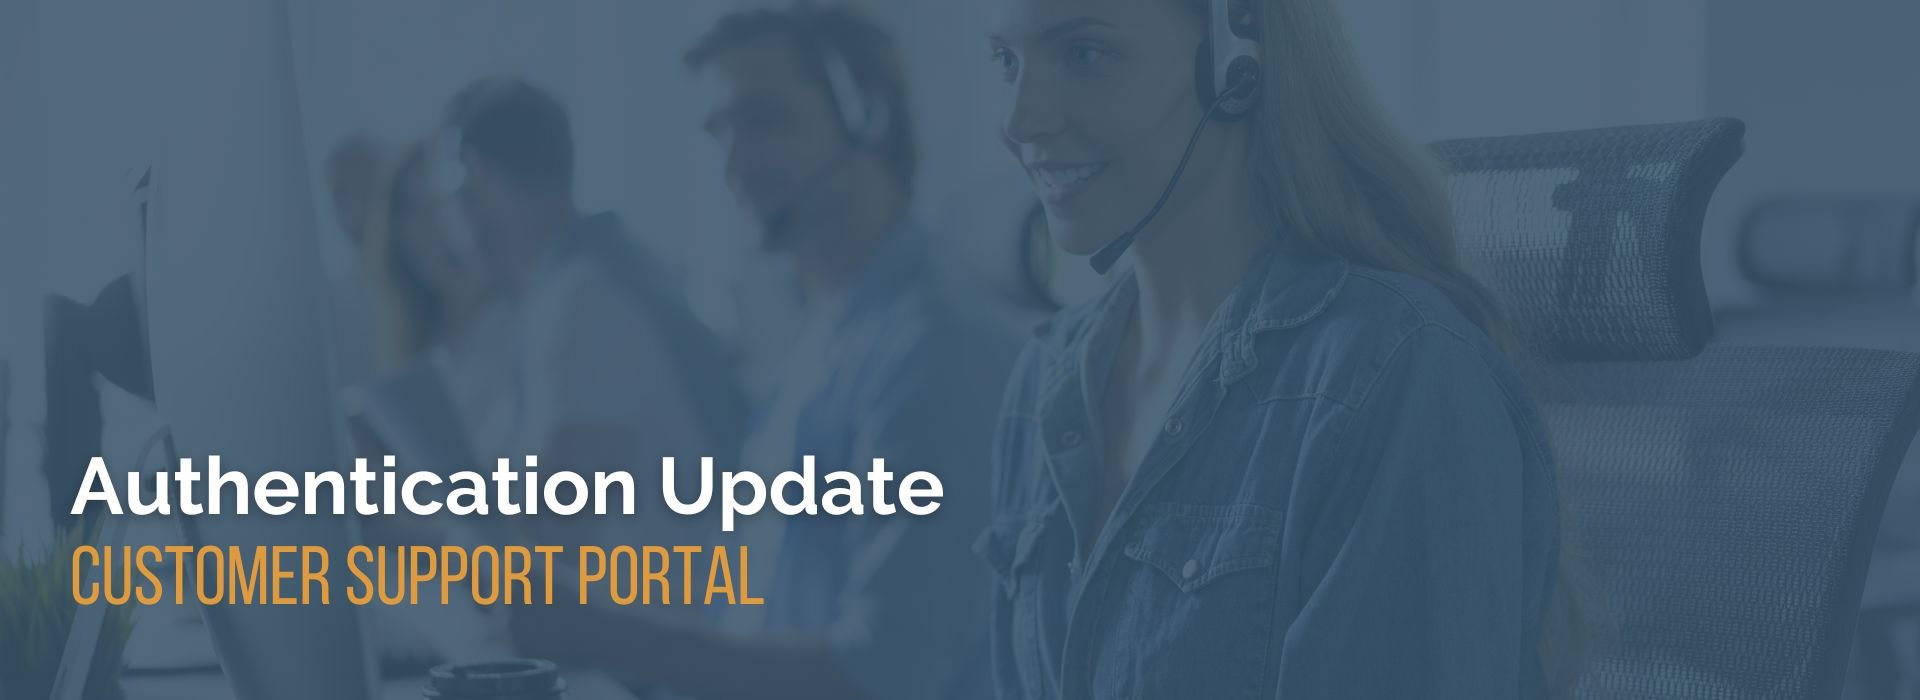 What is the Customer Support Portal?